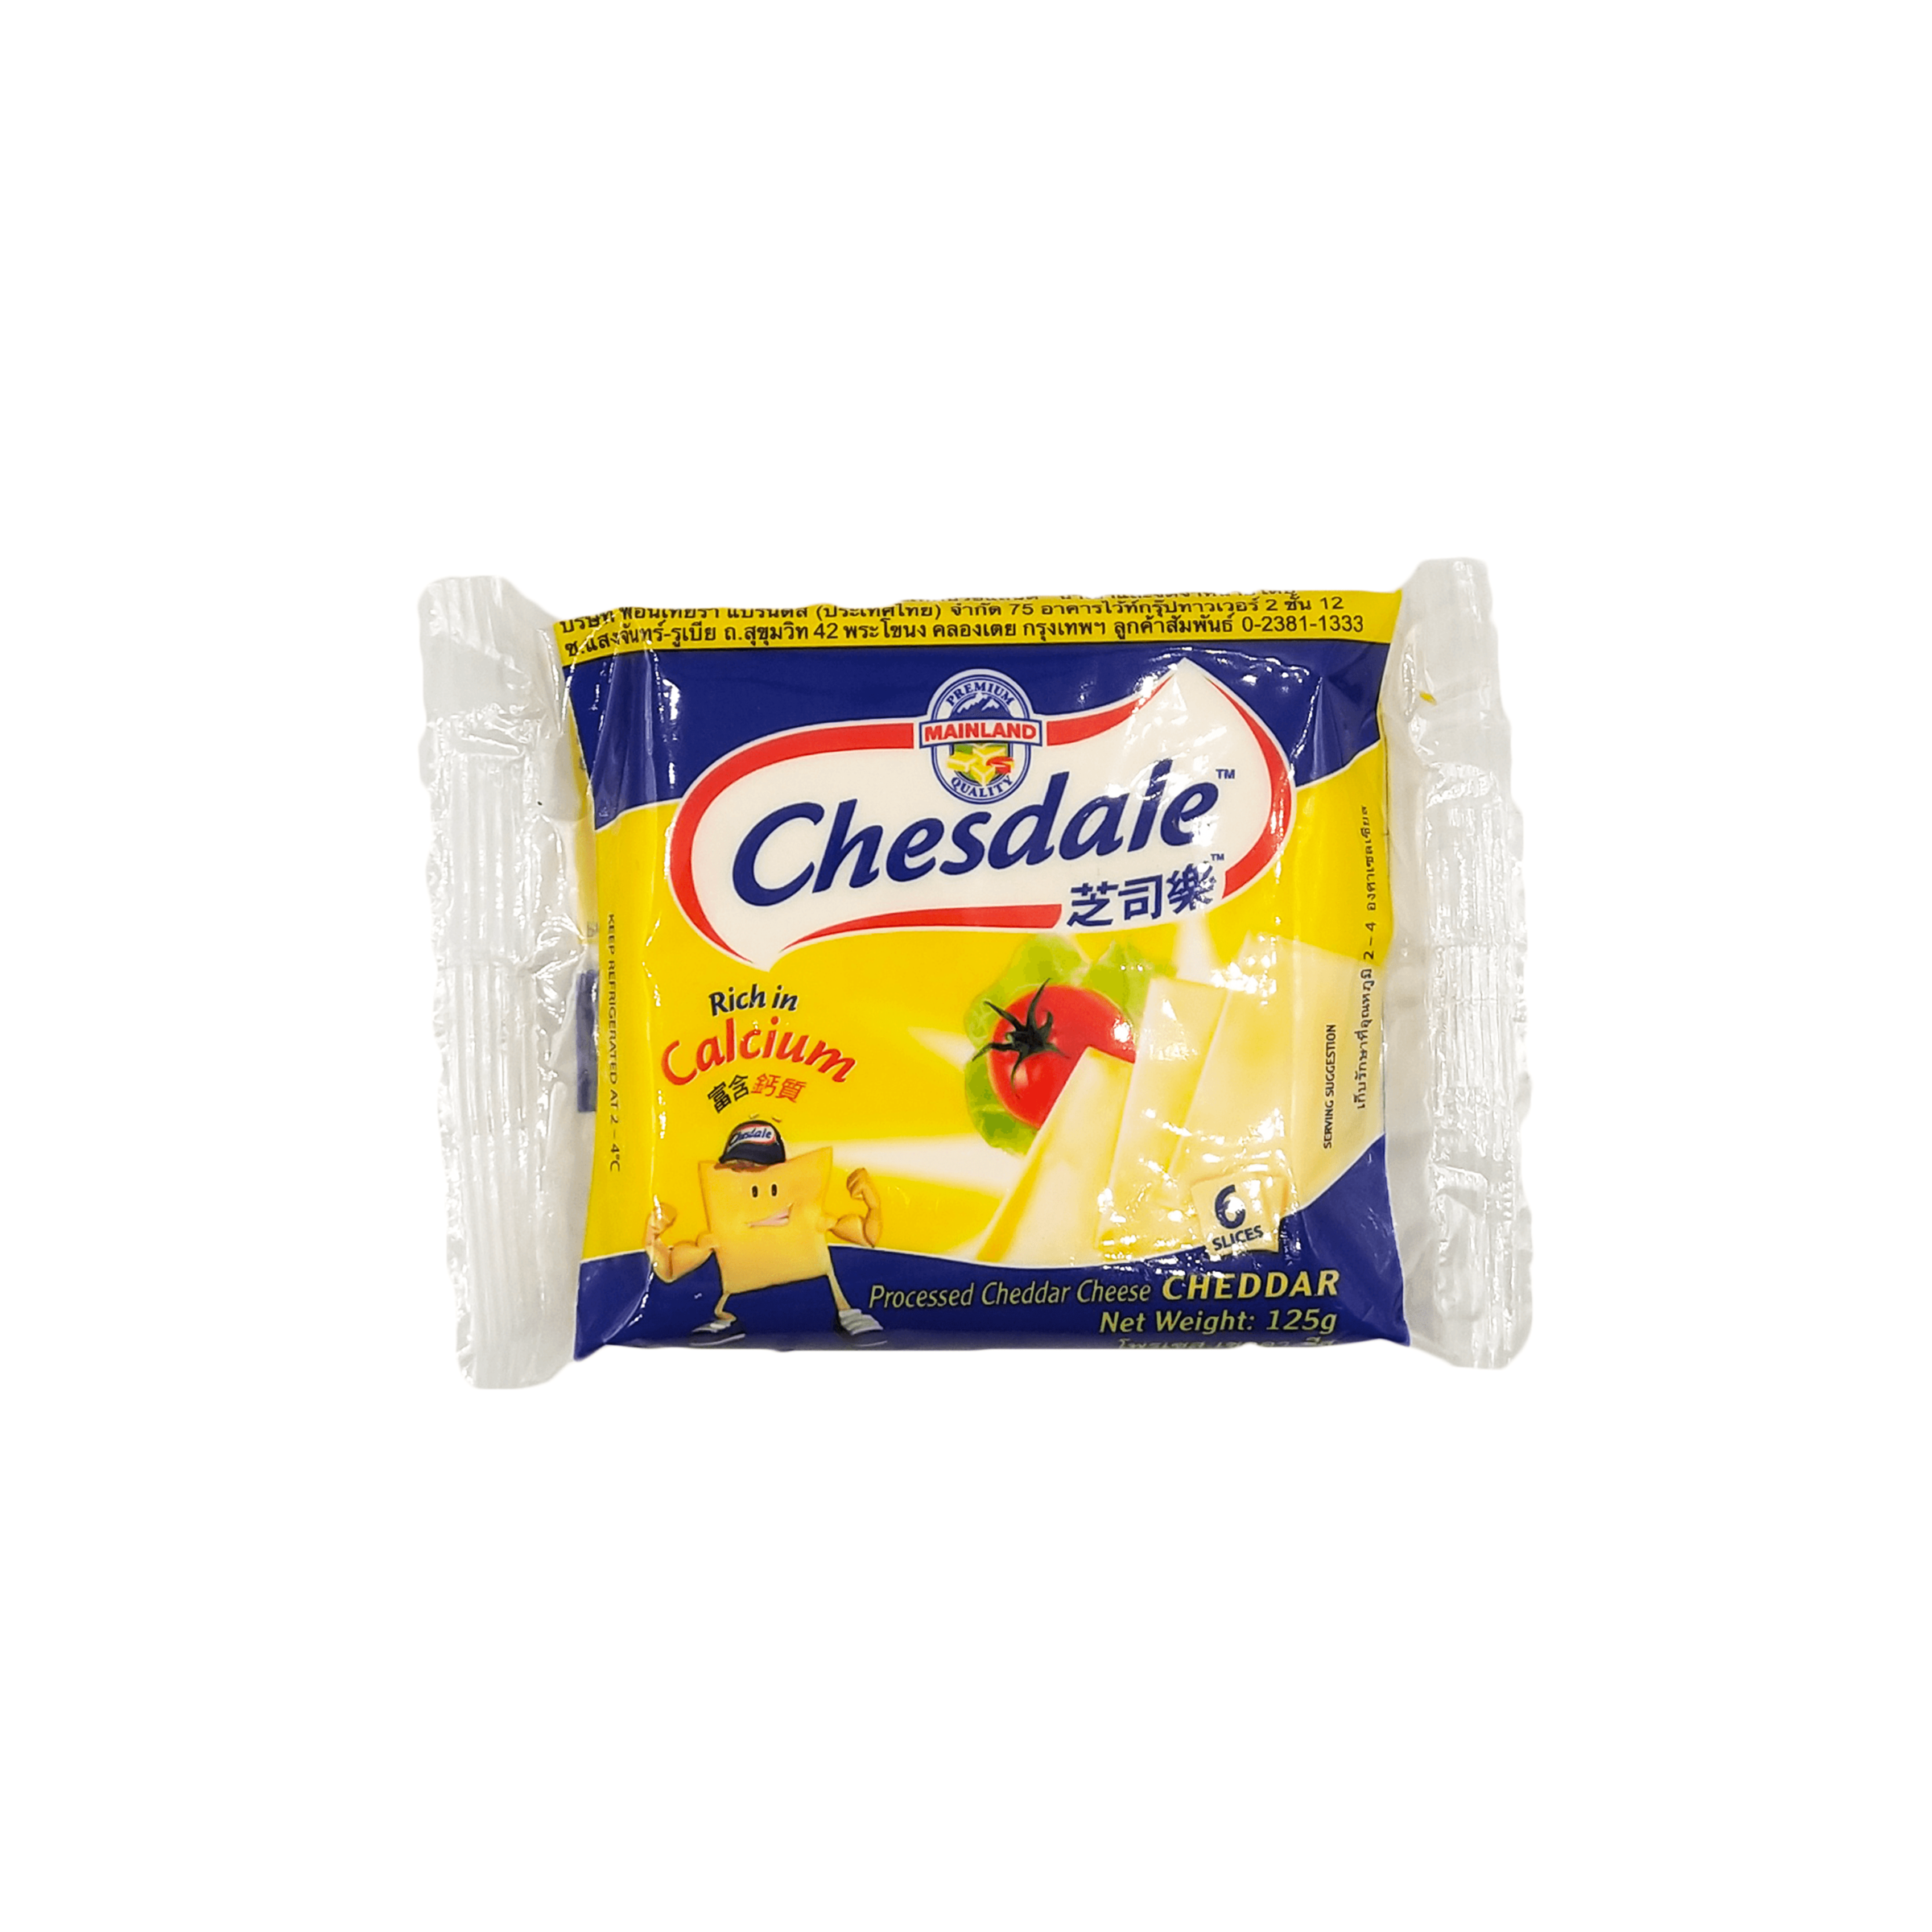 Chesdale Cheddar Cheese Slice 6s.png